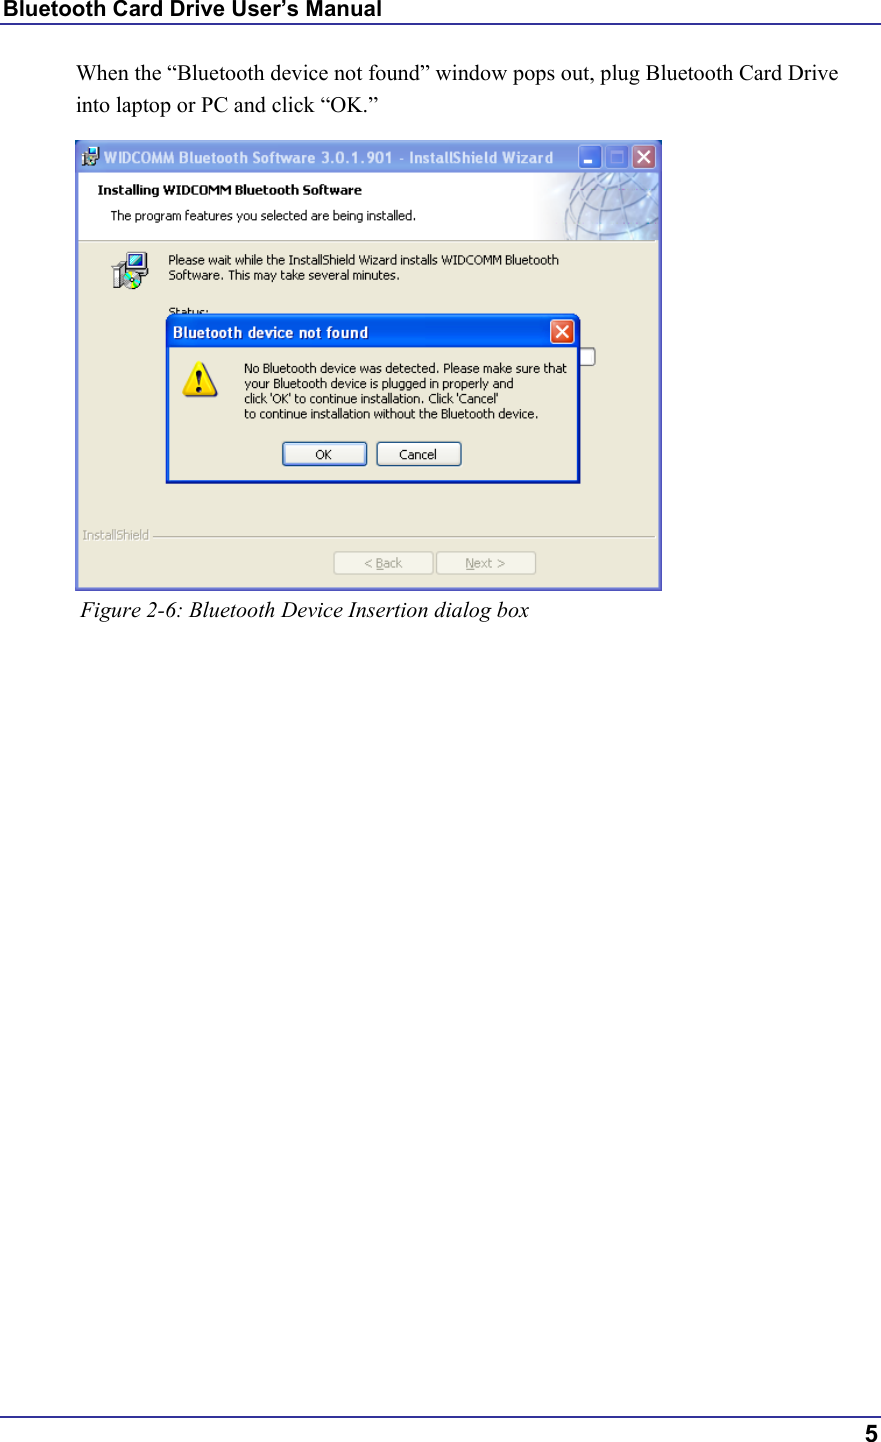 Bluetooth Card Drive User’s Manual  5 When the “Bluetooth device not found” window pops out, plug Bluetooth Card Drive into laptop or PC and click “OK.”            Figure 2-6: Bluetooth Device Insertion dialog box       